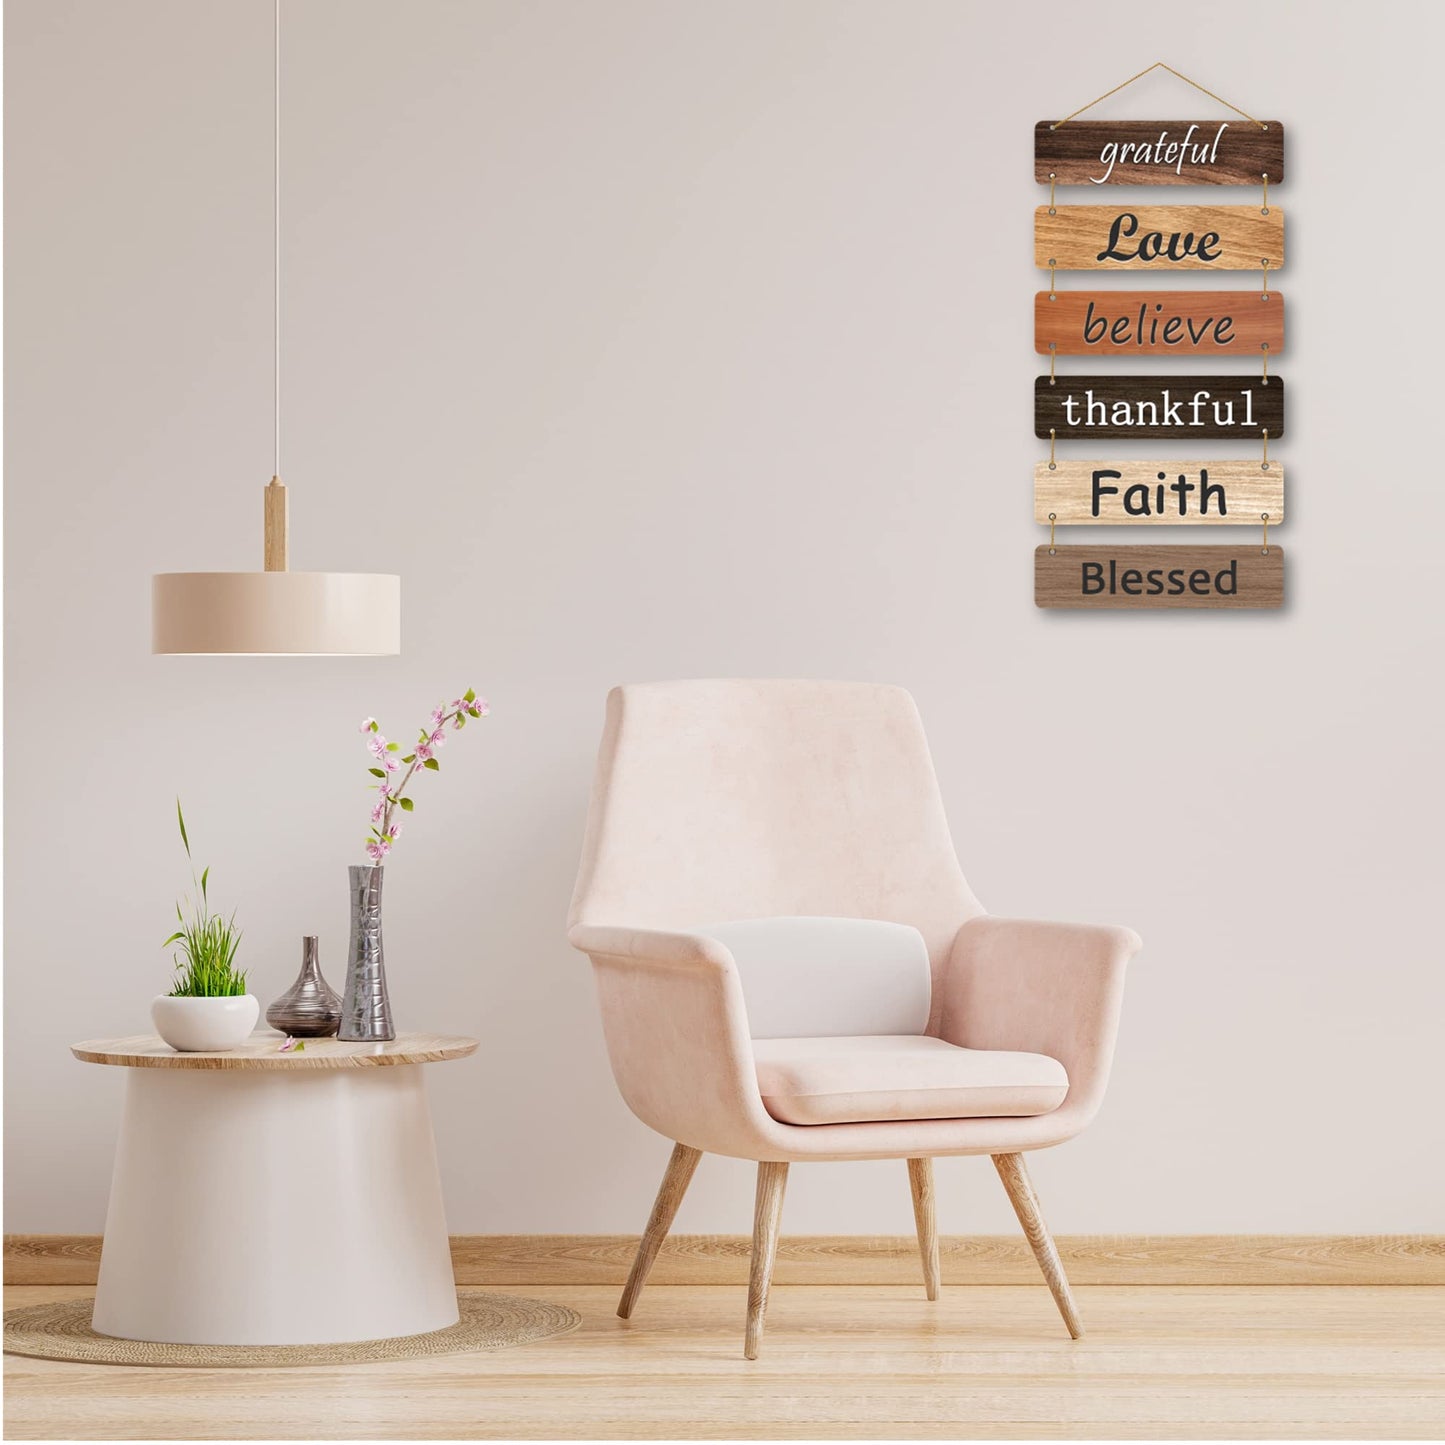 The Earthy House Room Décor Wall Hanging | Living Room | Bedroom| Home Décor | Inspirational Quotes - Grateful Love Believe (Set of 6)